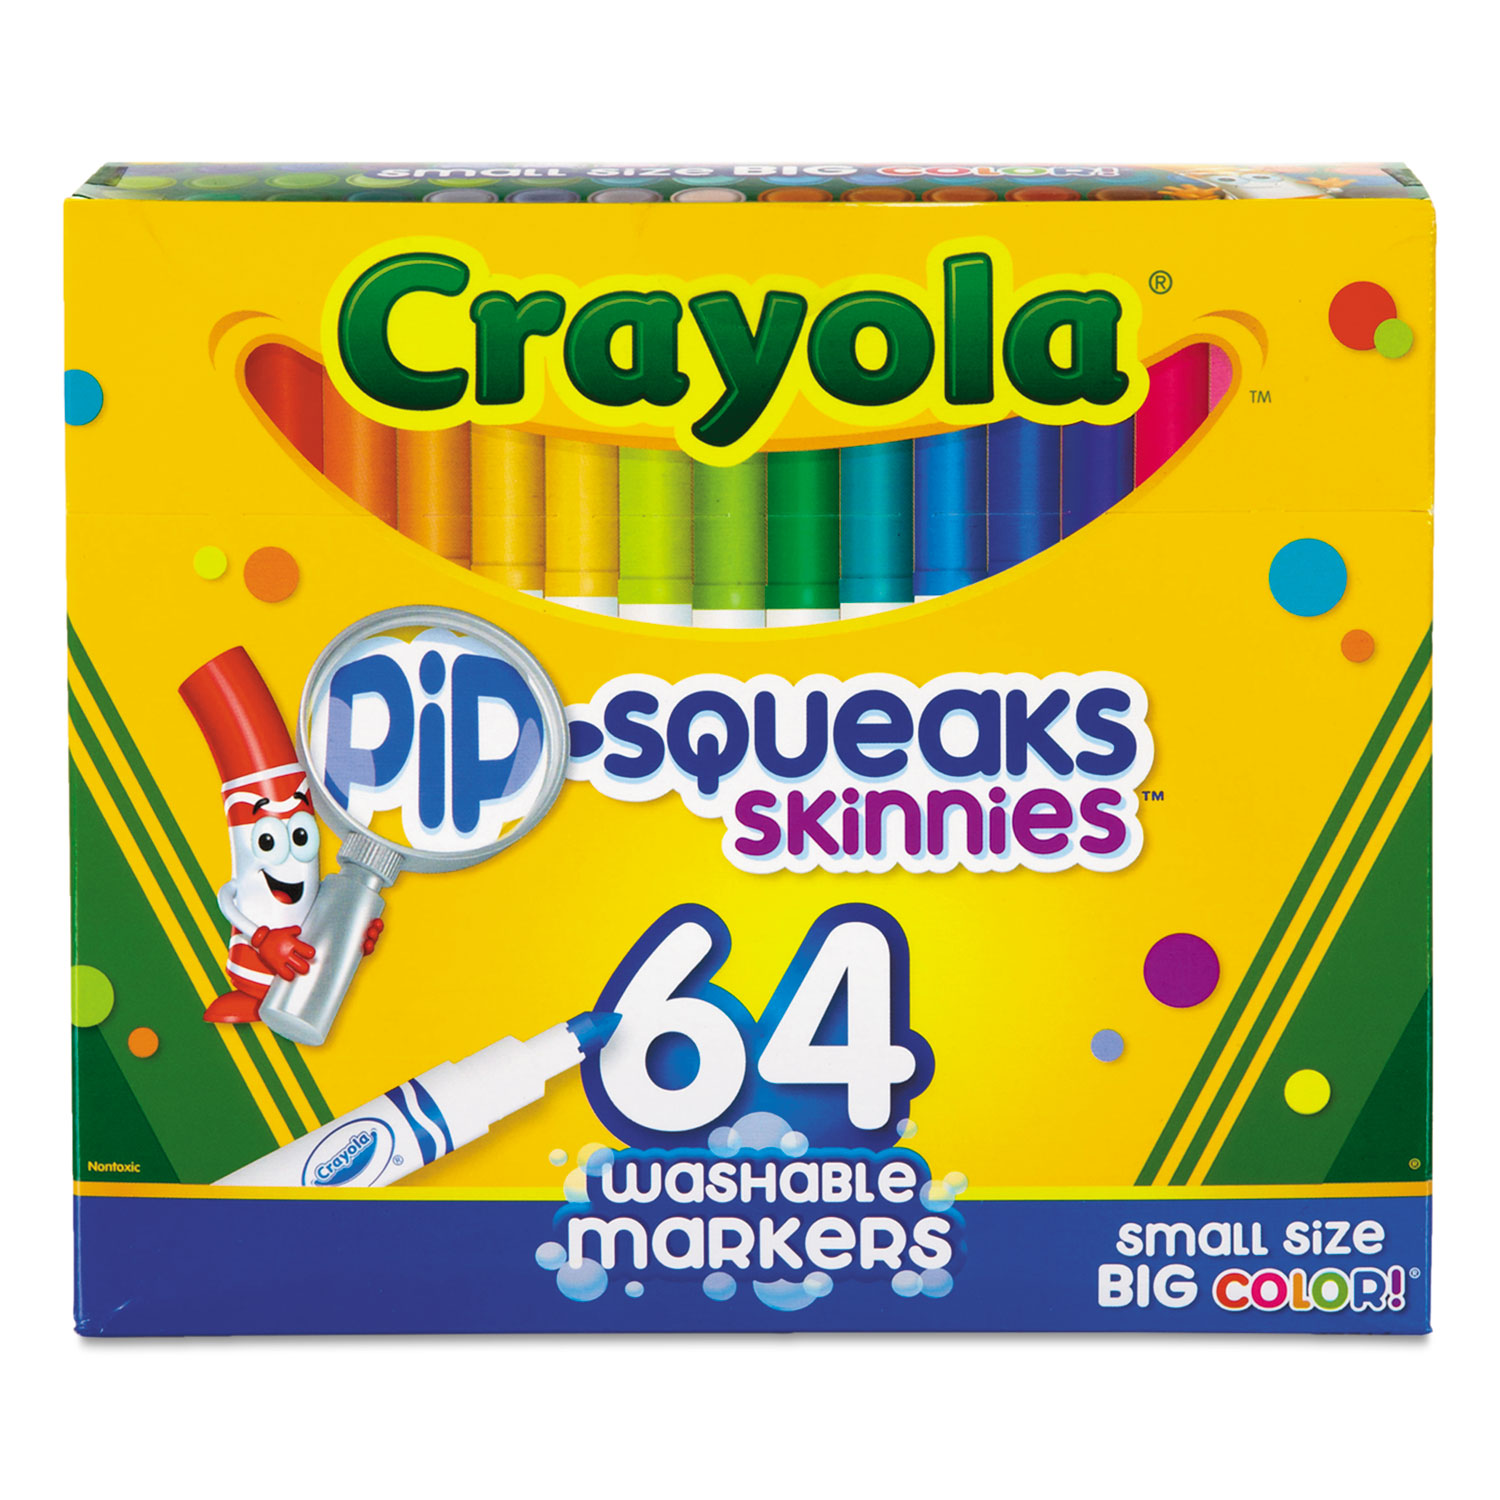  Crayola 588764 Pip-Squeaks Skinnies Washable Markers, Medium Bullet Tip, Assorted Colors, 64/Pack (CYO588764) 